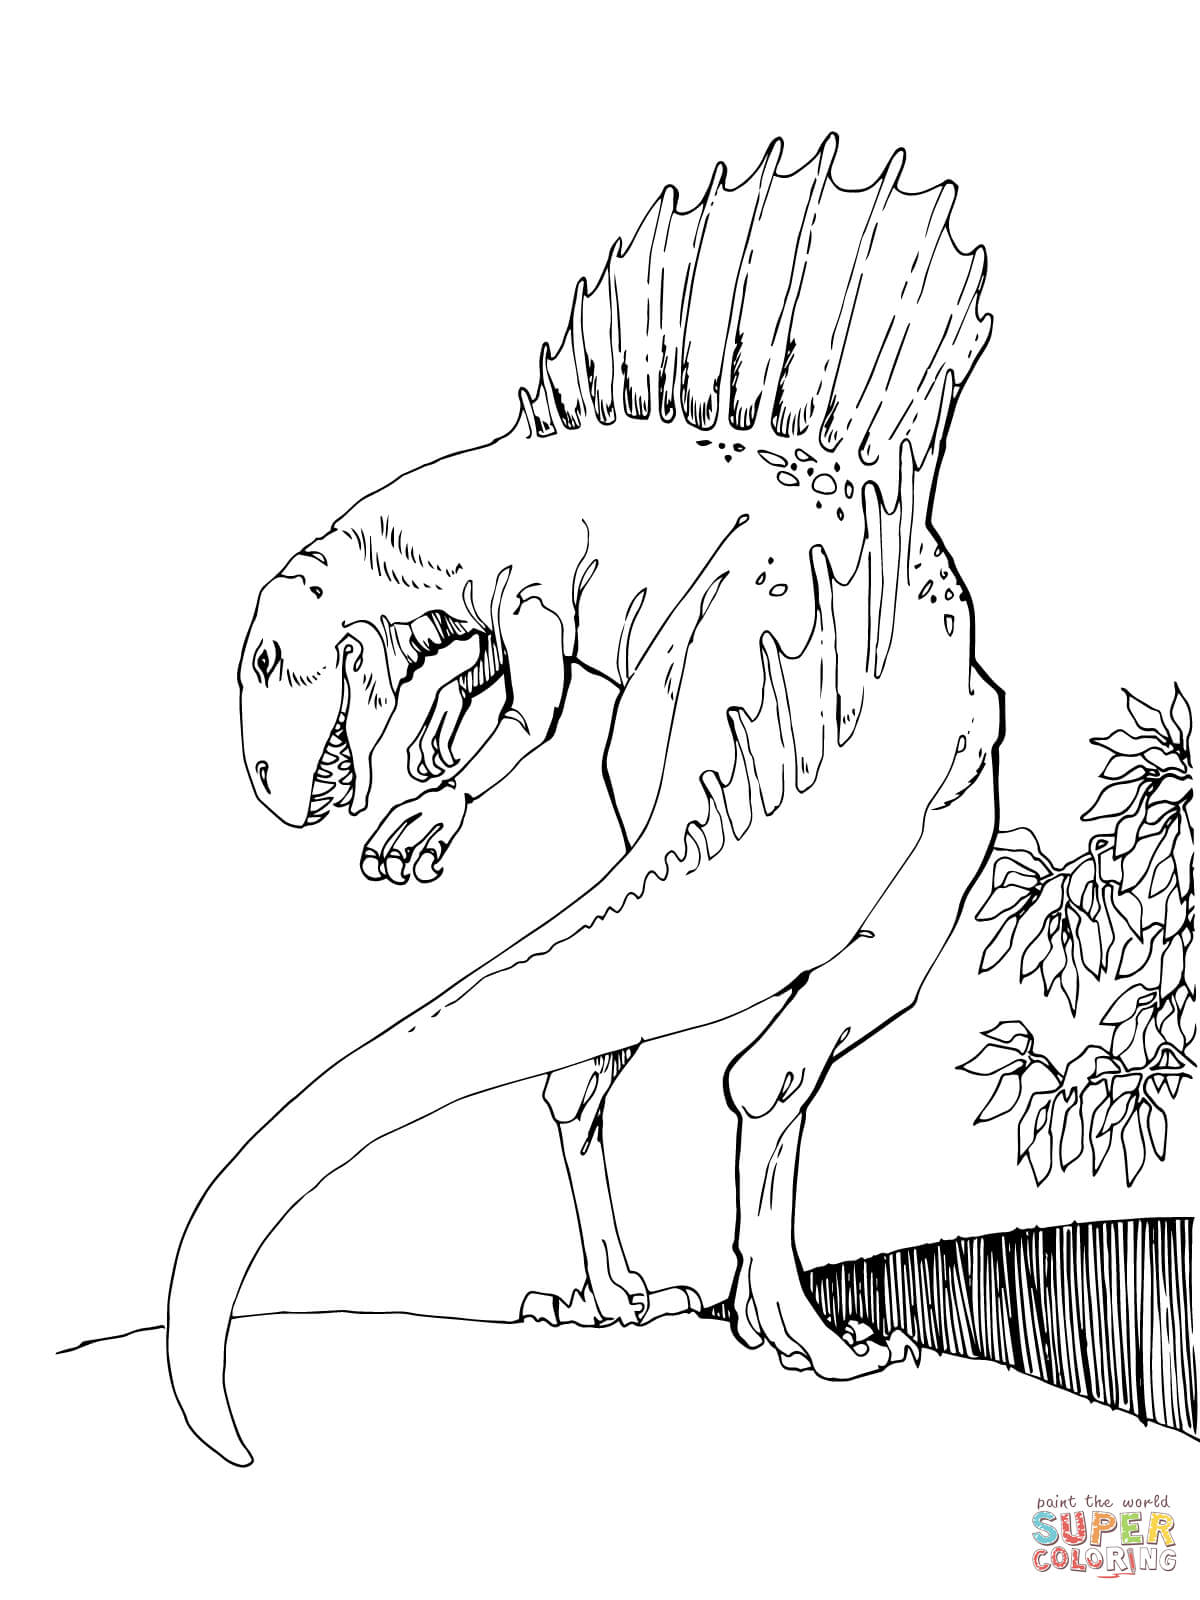 Jurassic World Evolution Coloring Pages Jurassic World Coloring Pages